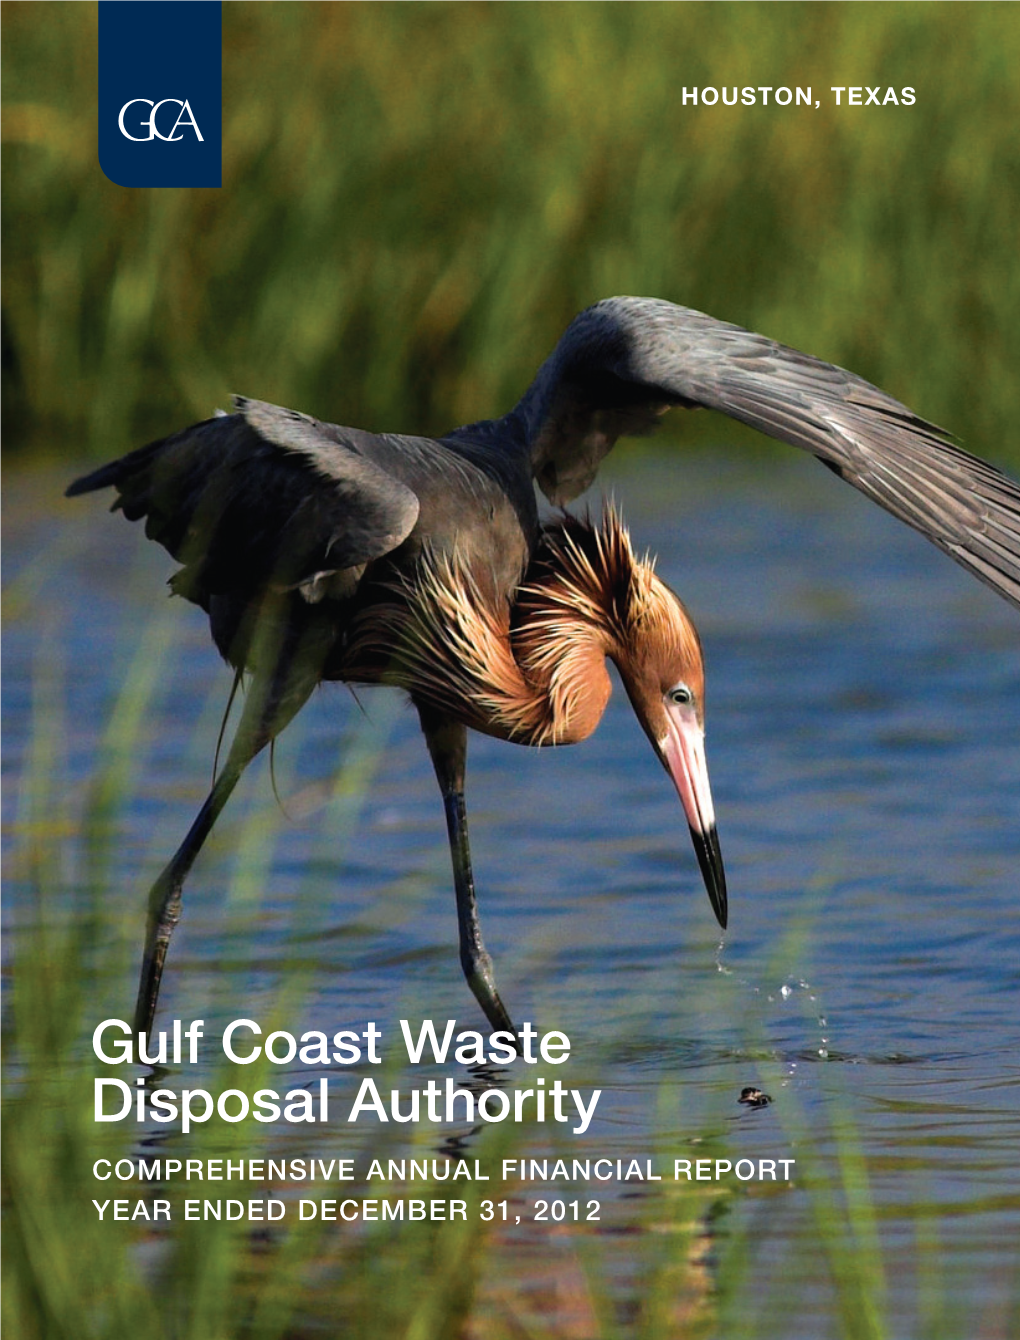 Gulf Coast Waste Disposal Authority COMPREHENSIVE ANNUAL FINANCIAL REPORT YEAR ENDED DECEMBER 31, 2012